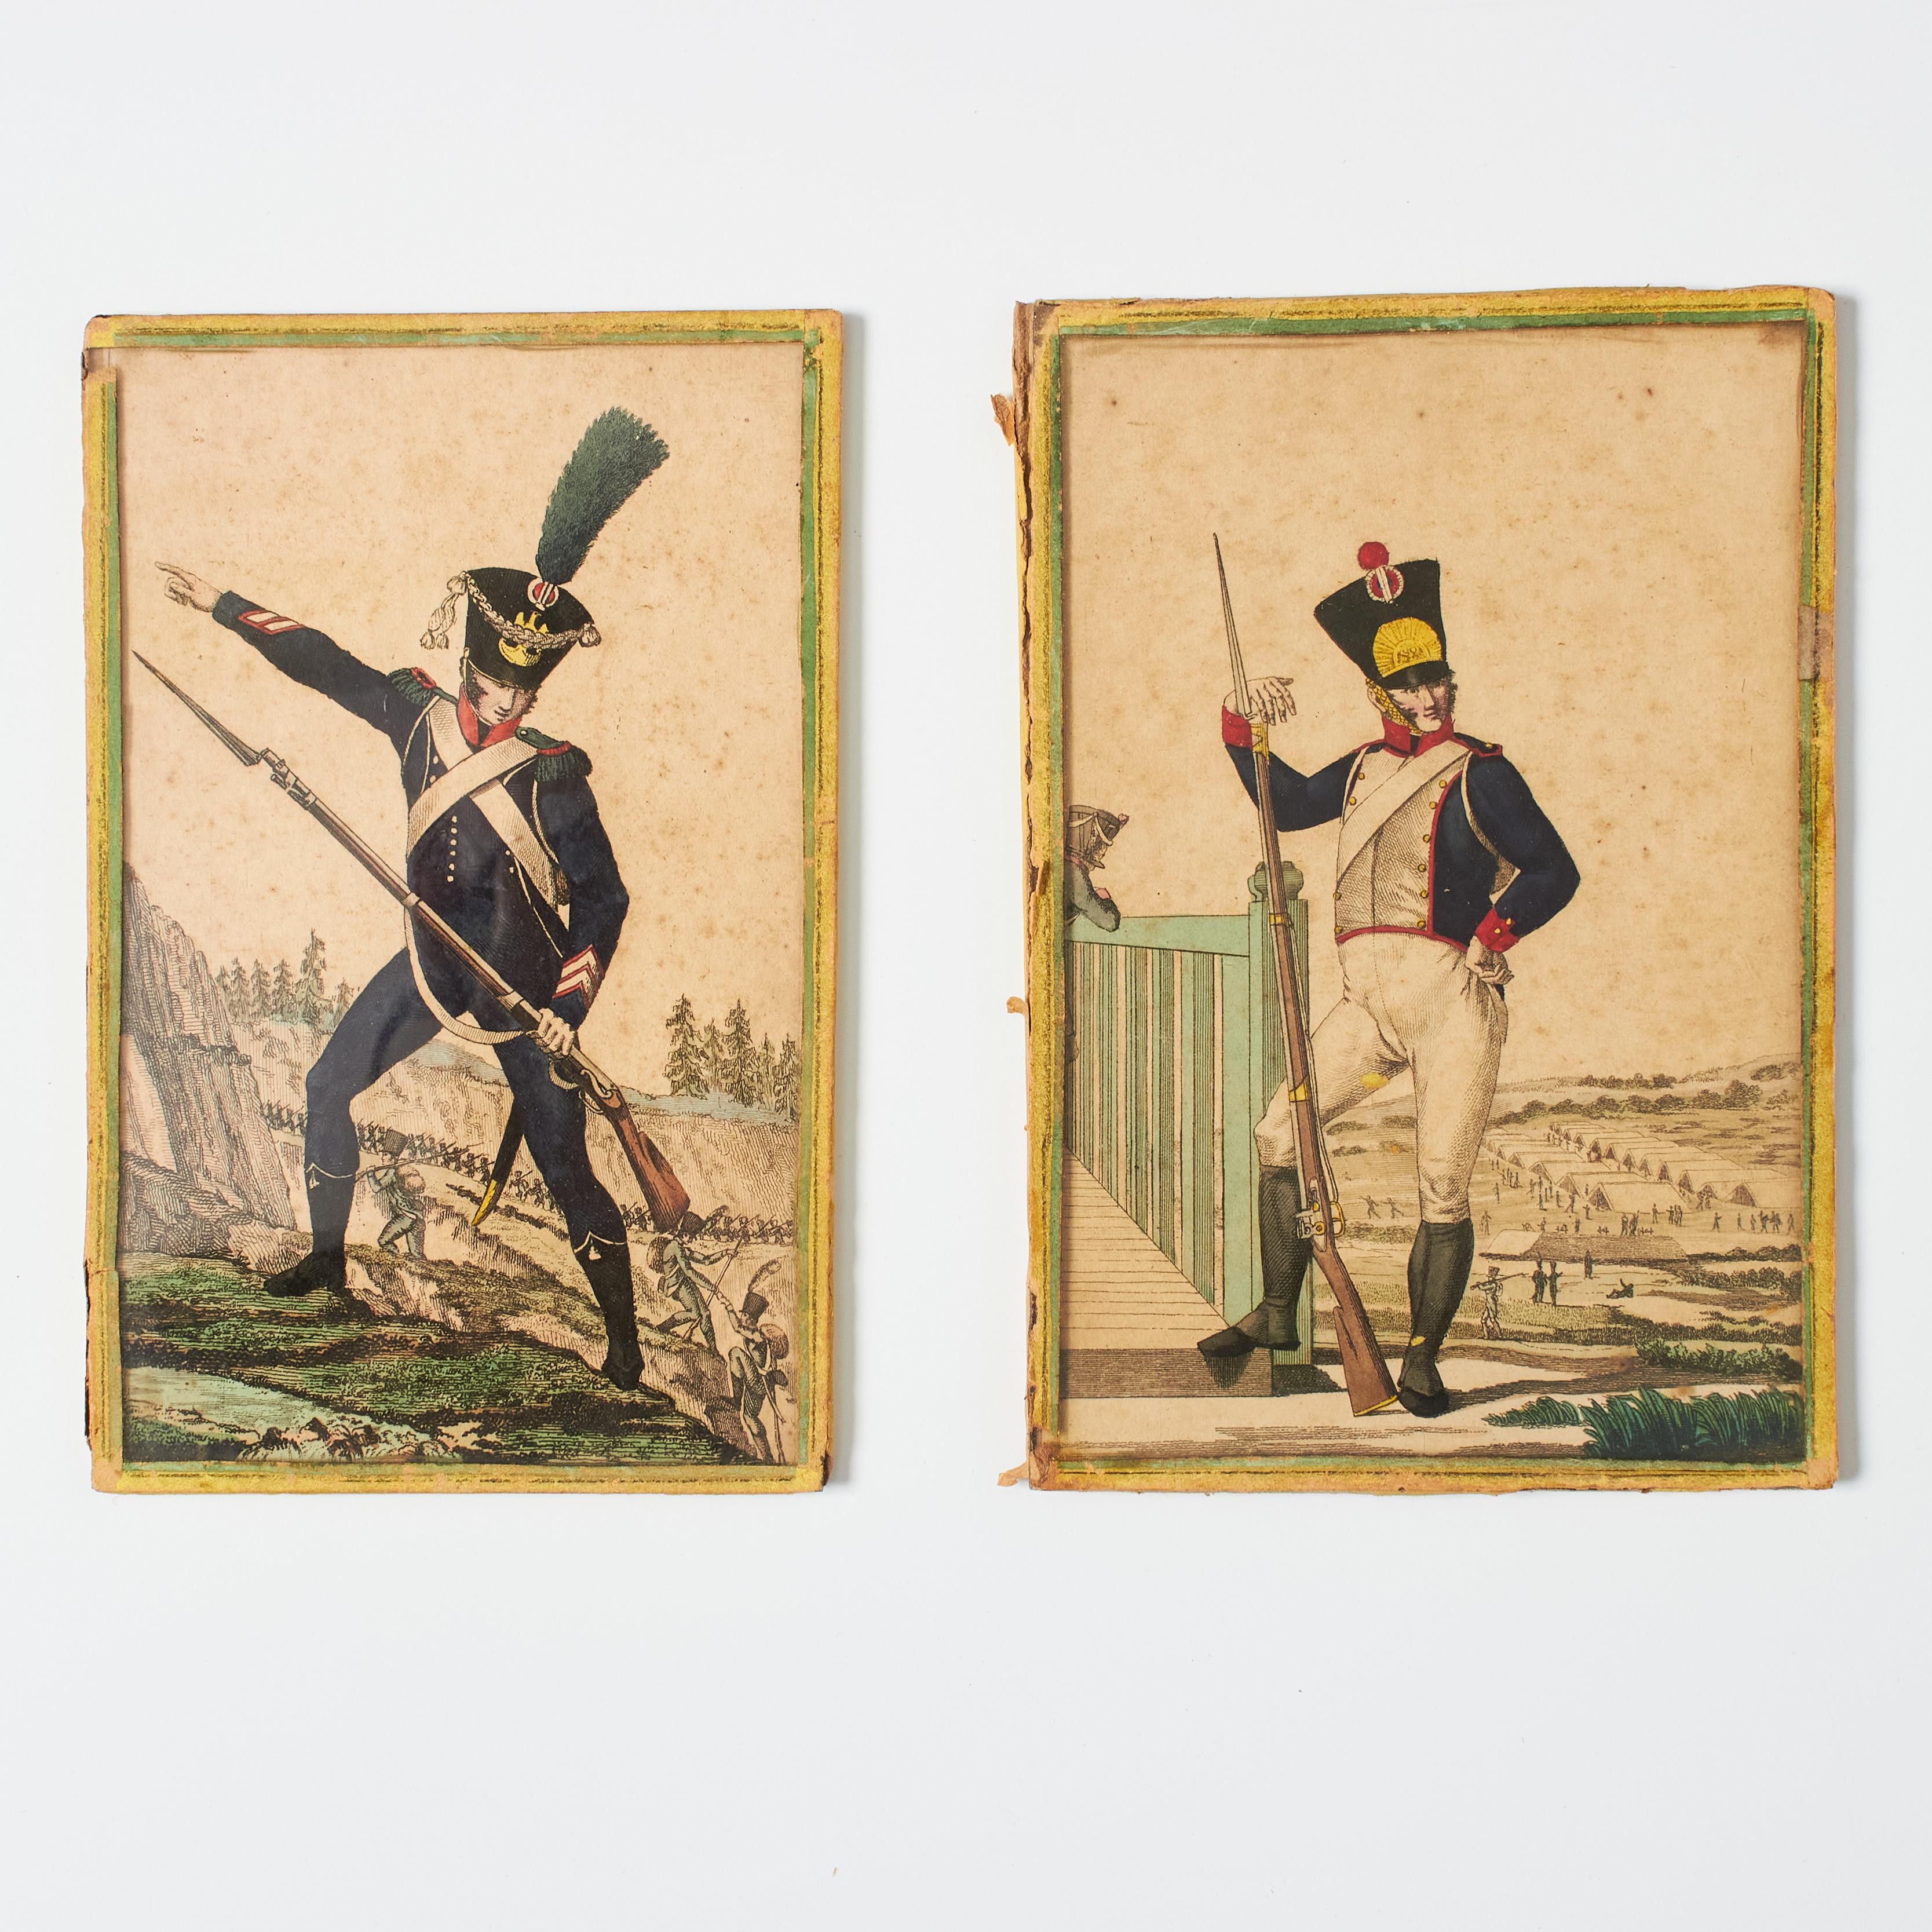 Explore military history through our enchanting pair of vintage 20th-century soldier engravings. Adorned with delicate colors, a beautiful patina, and framed in light yellow paper with protective glass, these artworks evoke the essence of a bygone